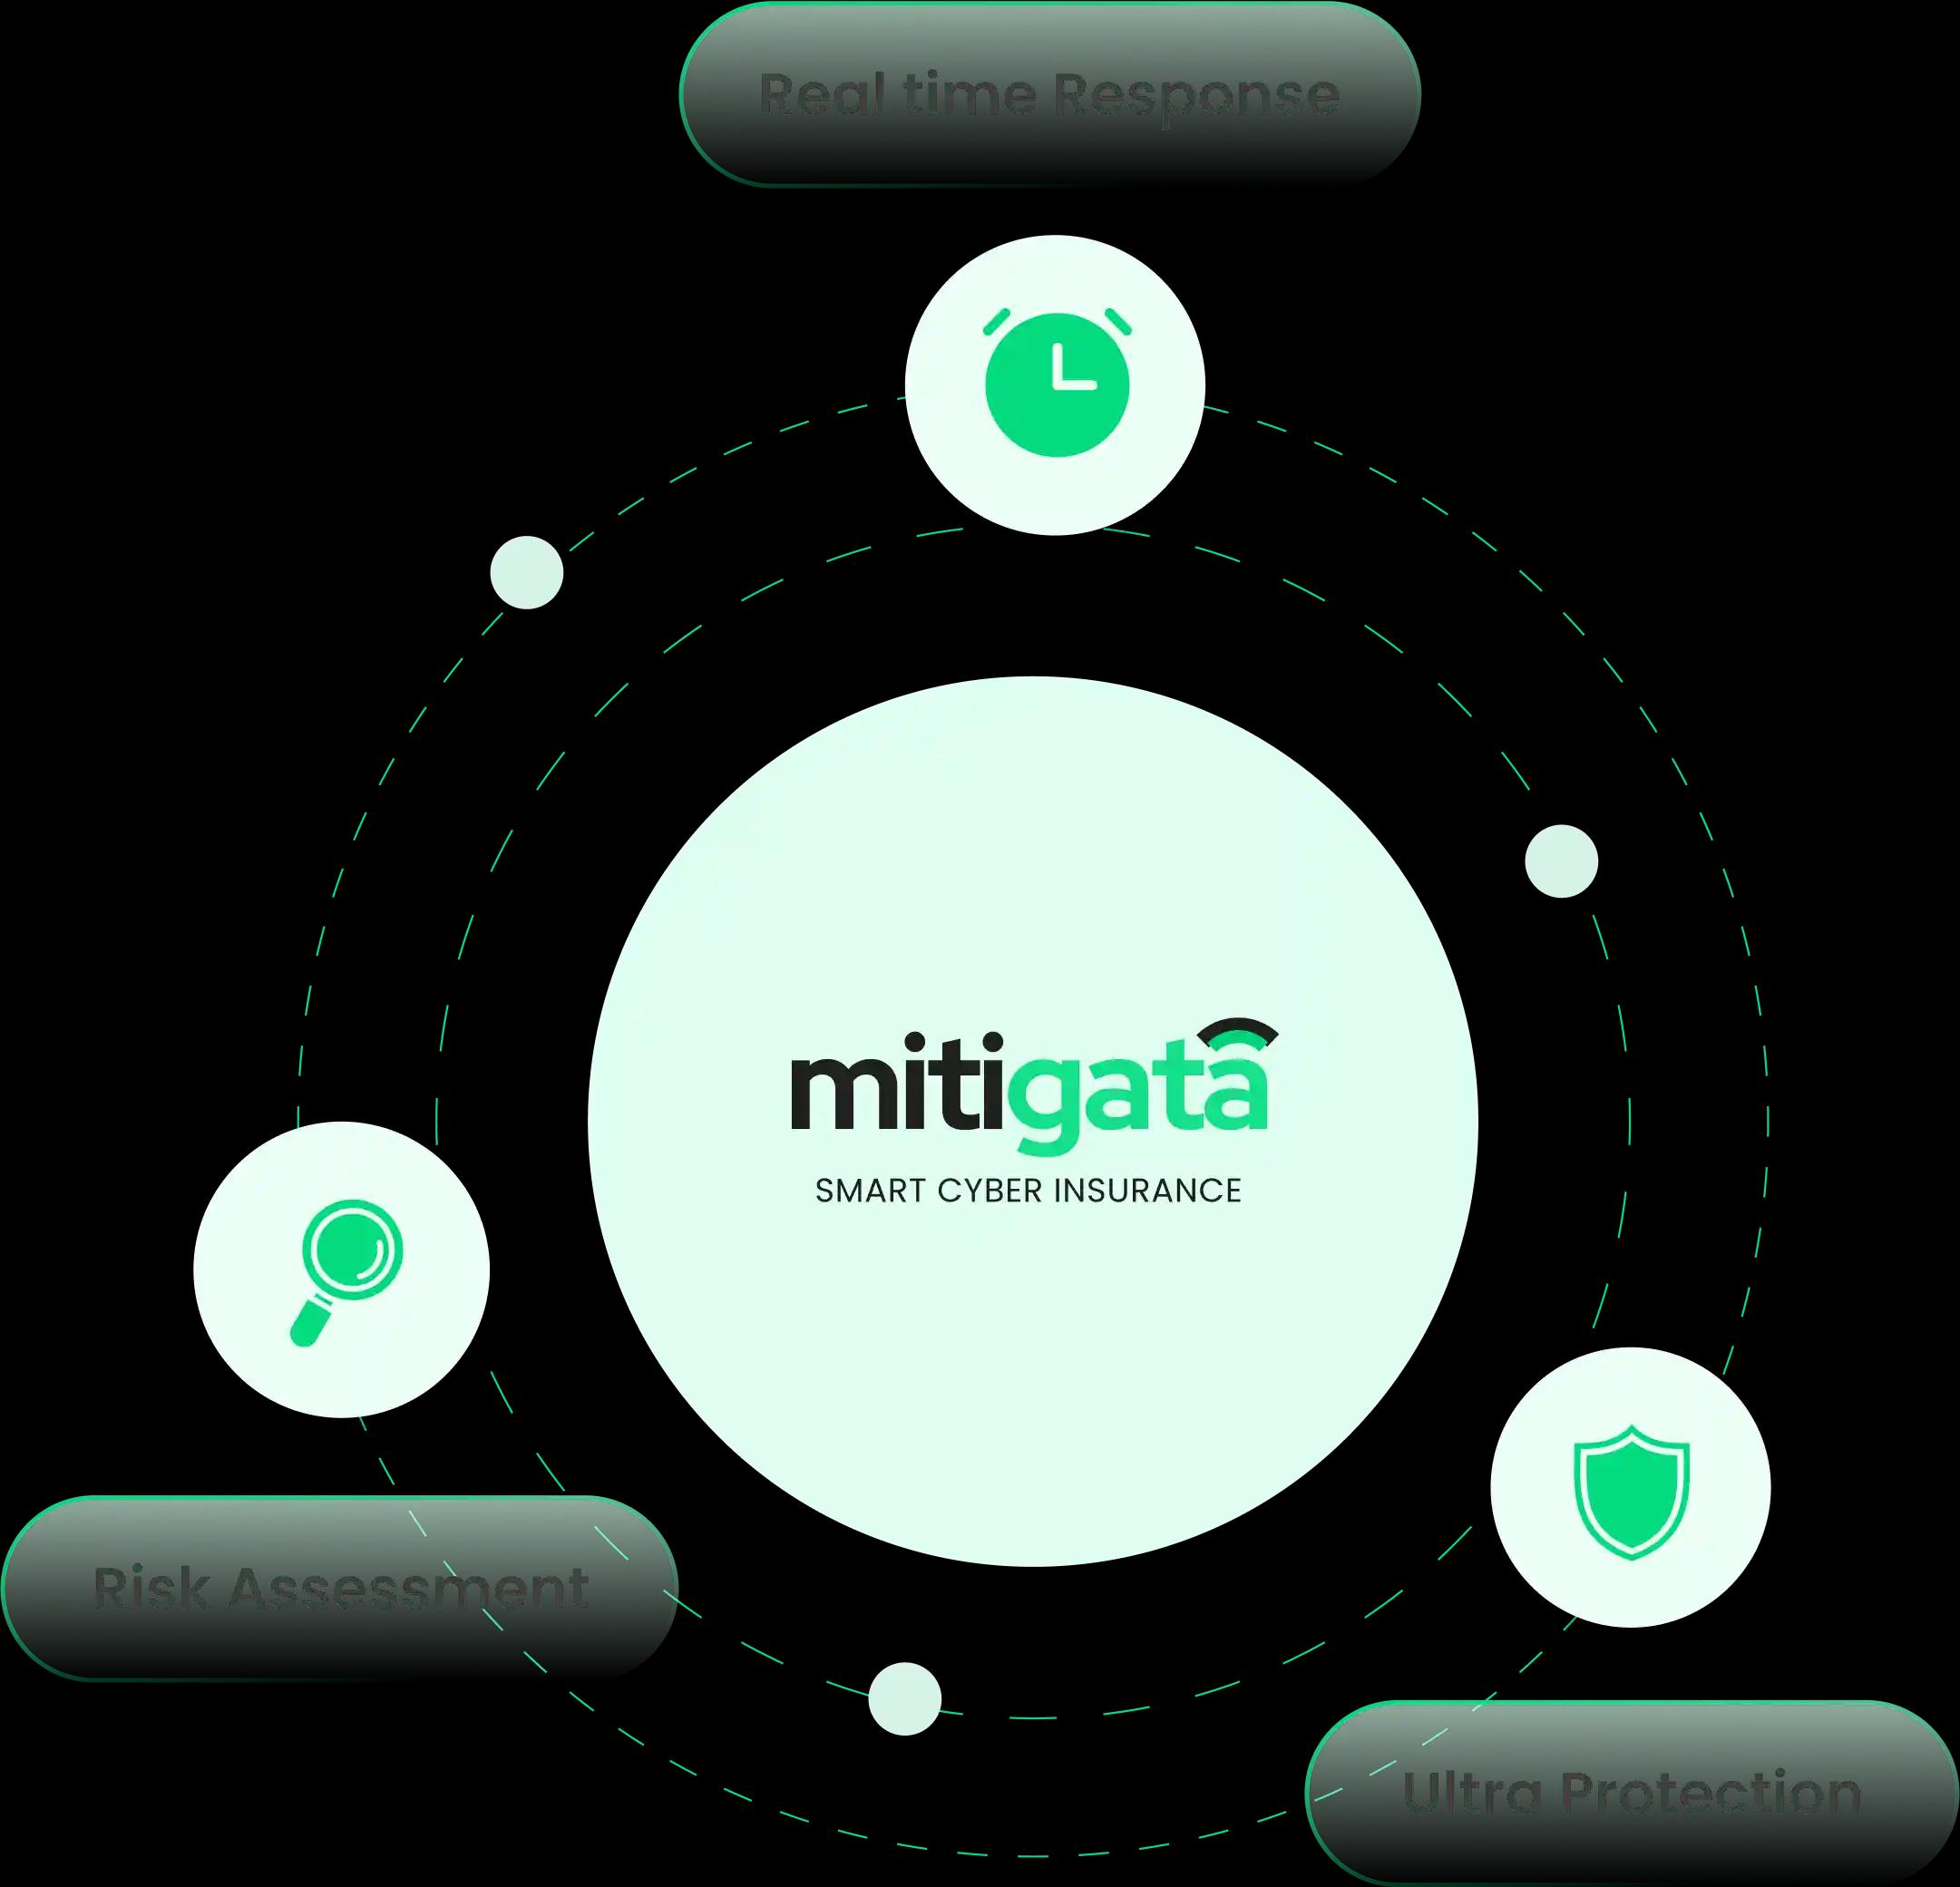 Flowchart with four nodes including Real-time Response and Risk Assessment, illustrating Mitigata’s strategic cyber insurance approach.